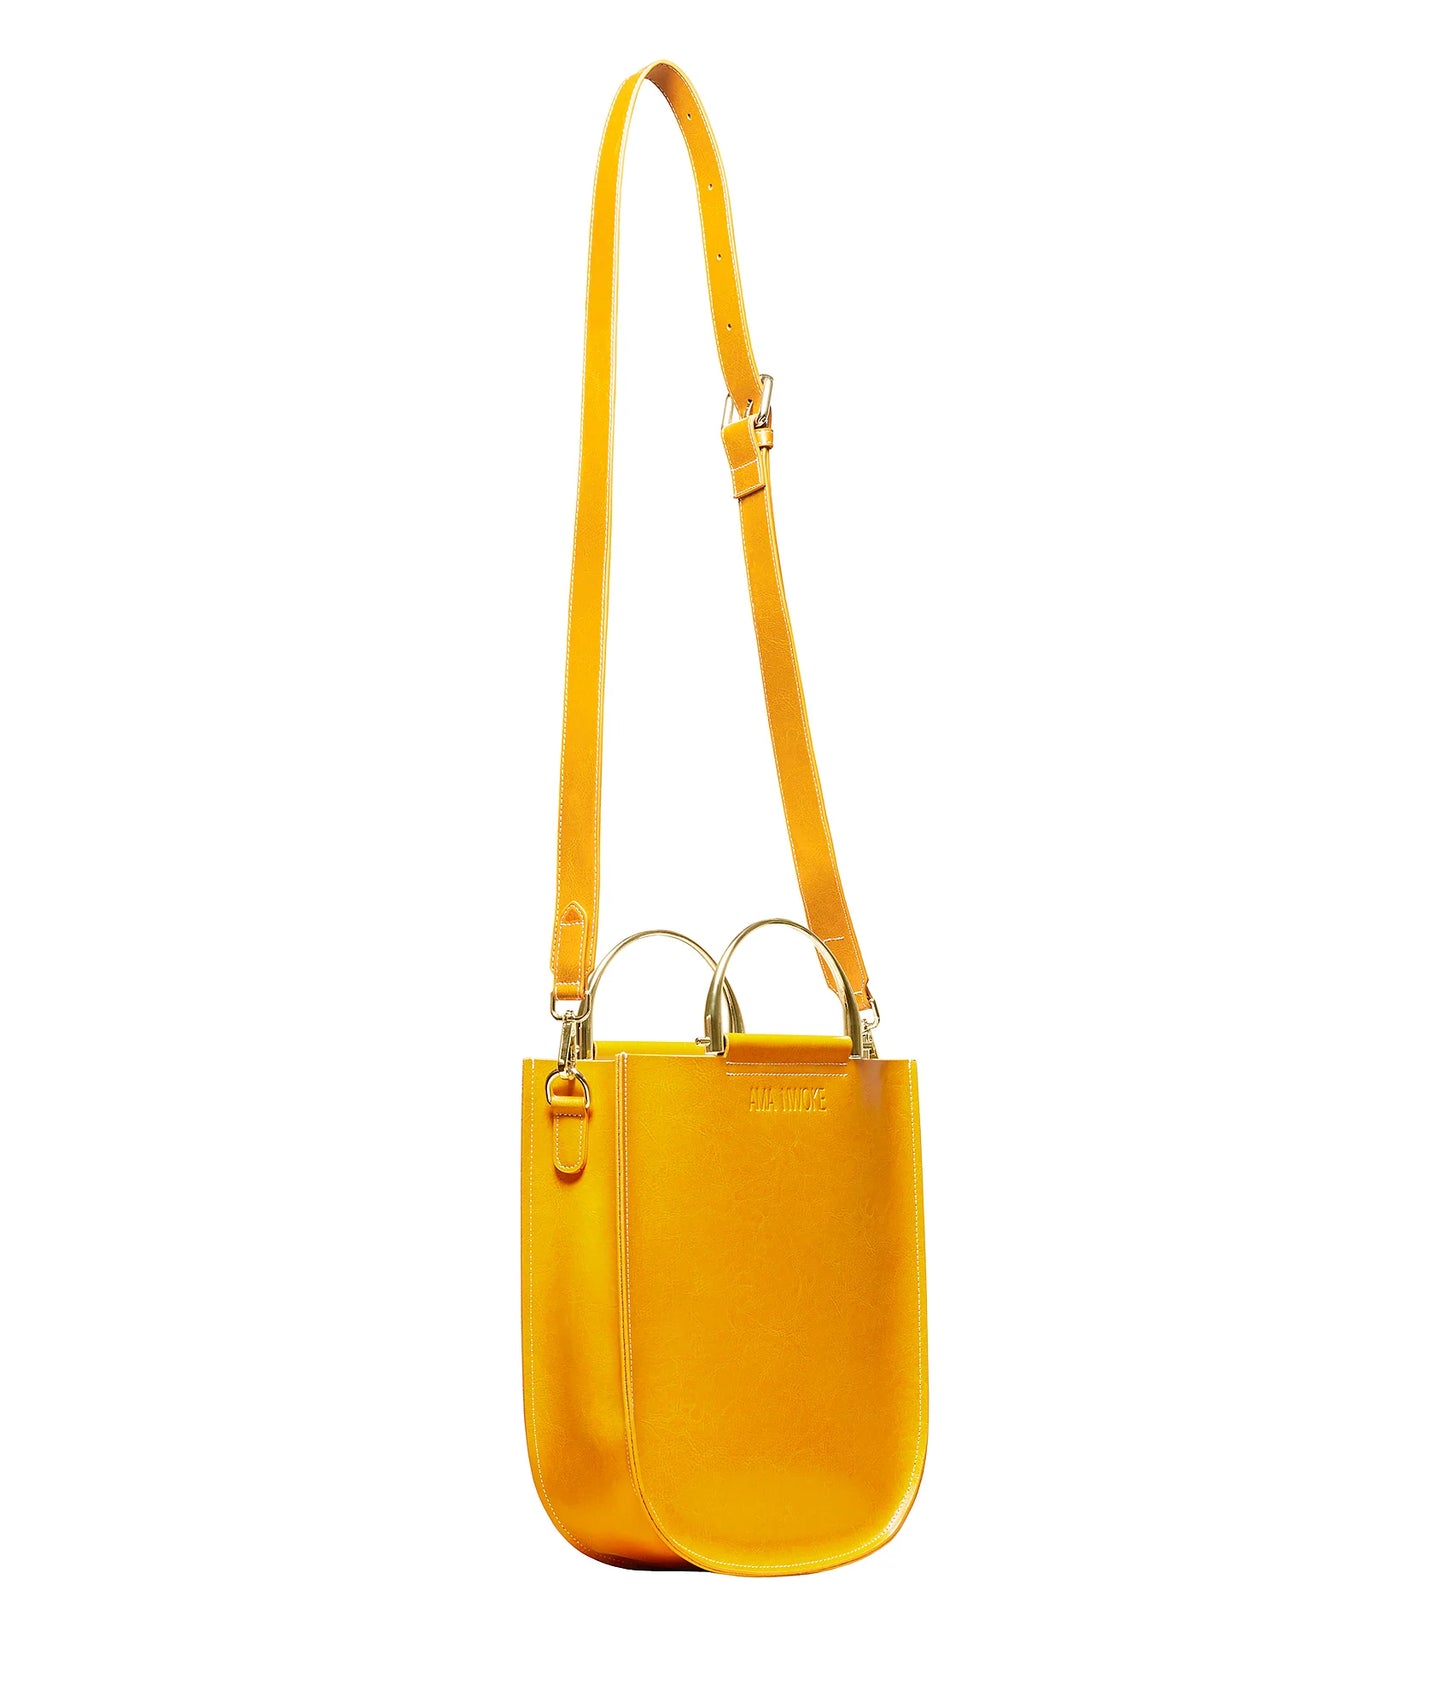 Soft Leather Tote Golden Yellow- Gold Handle